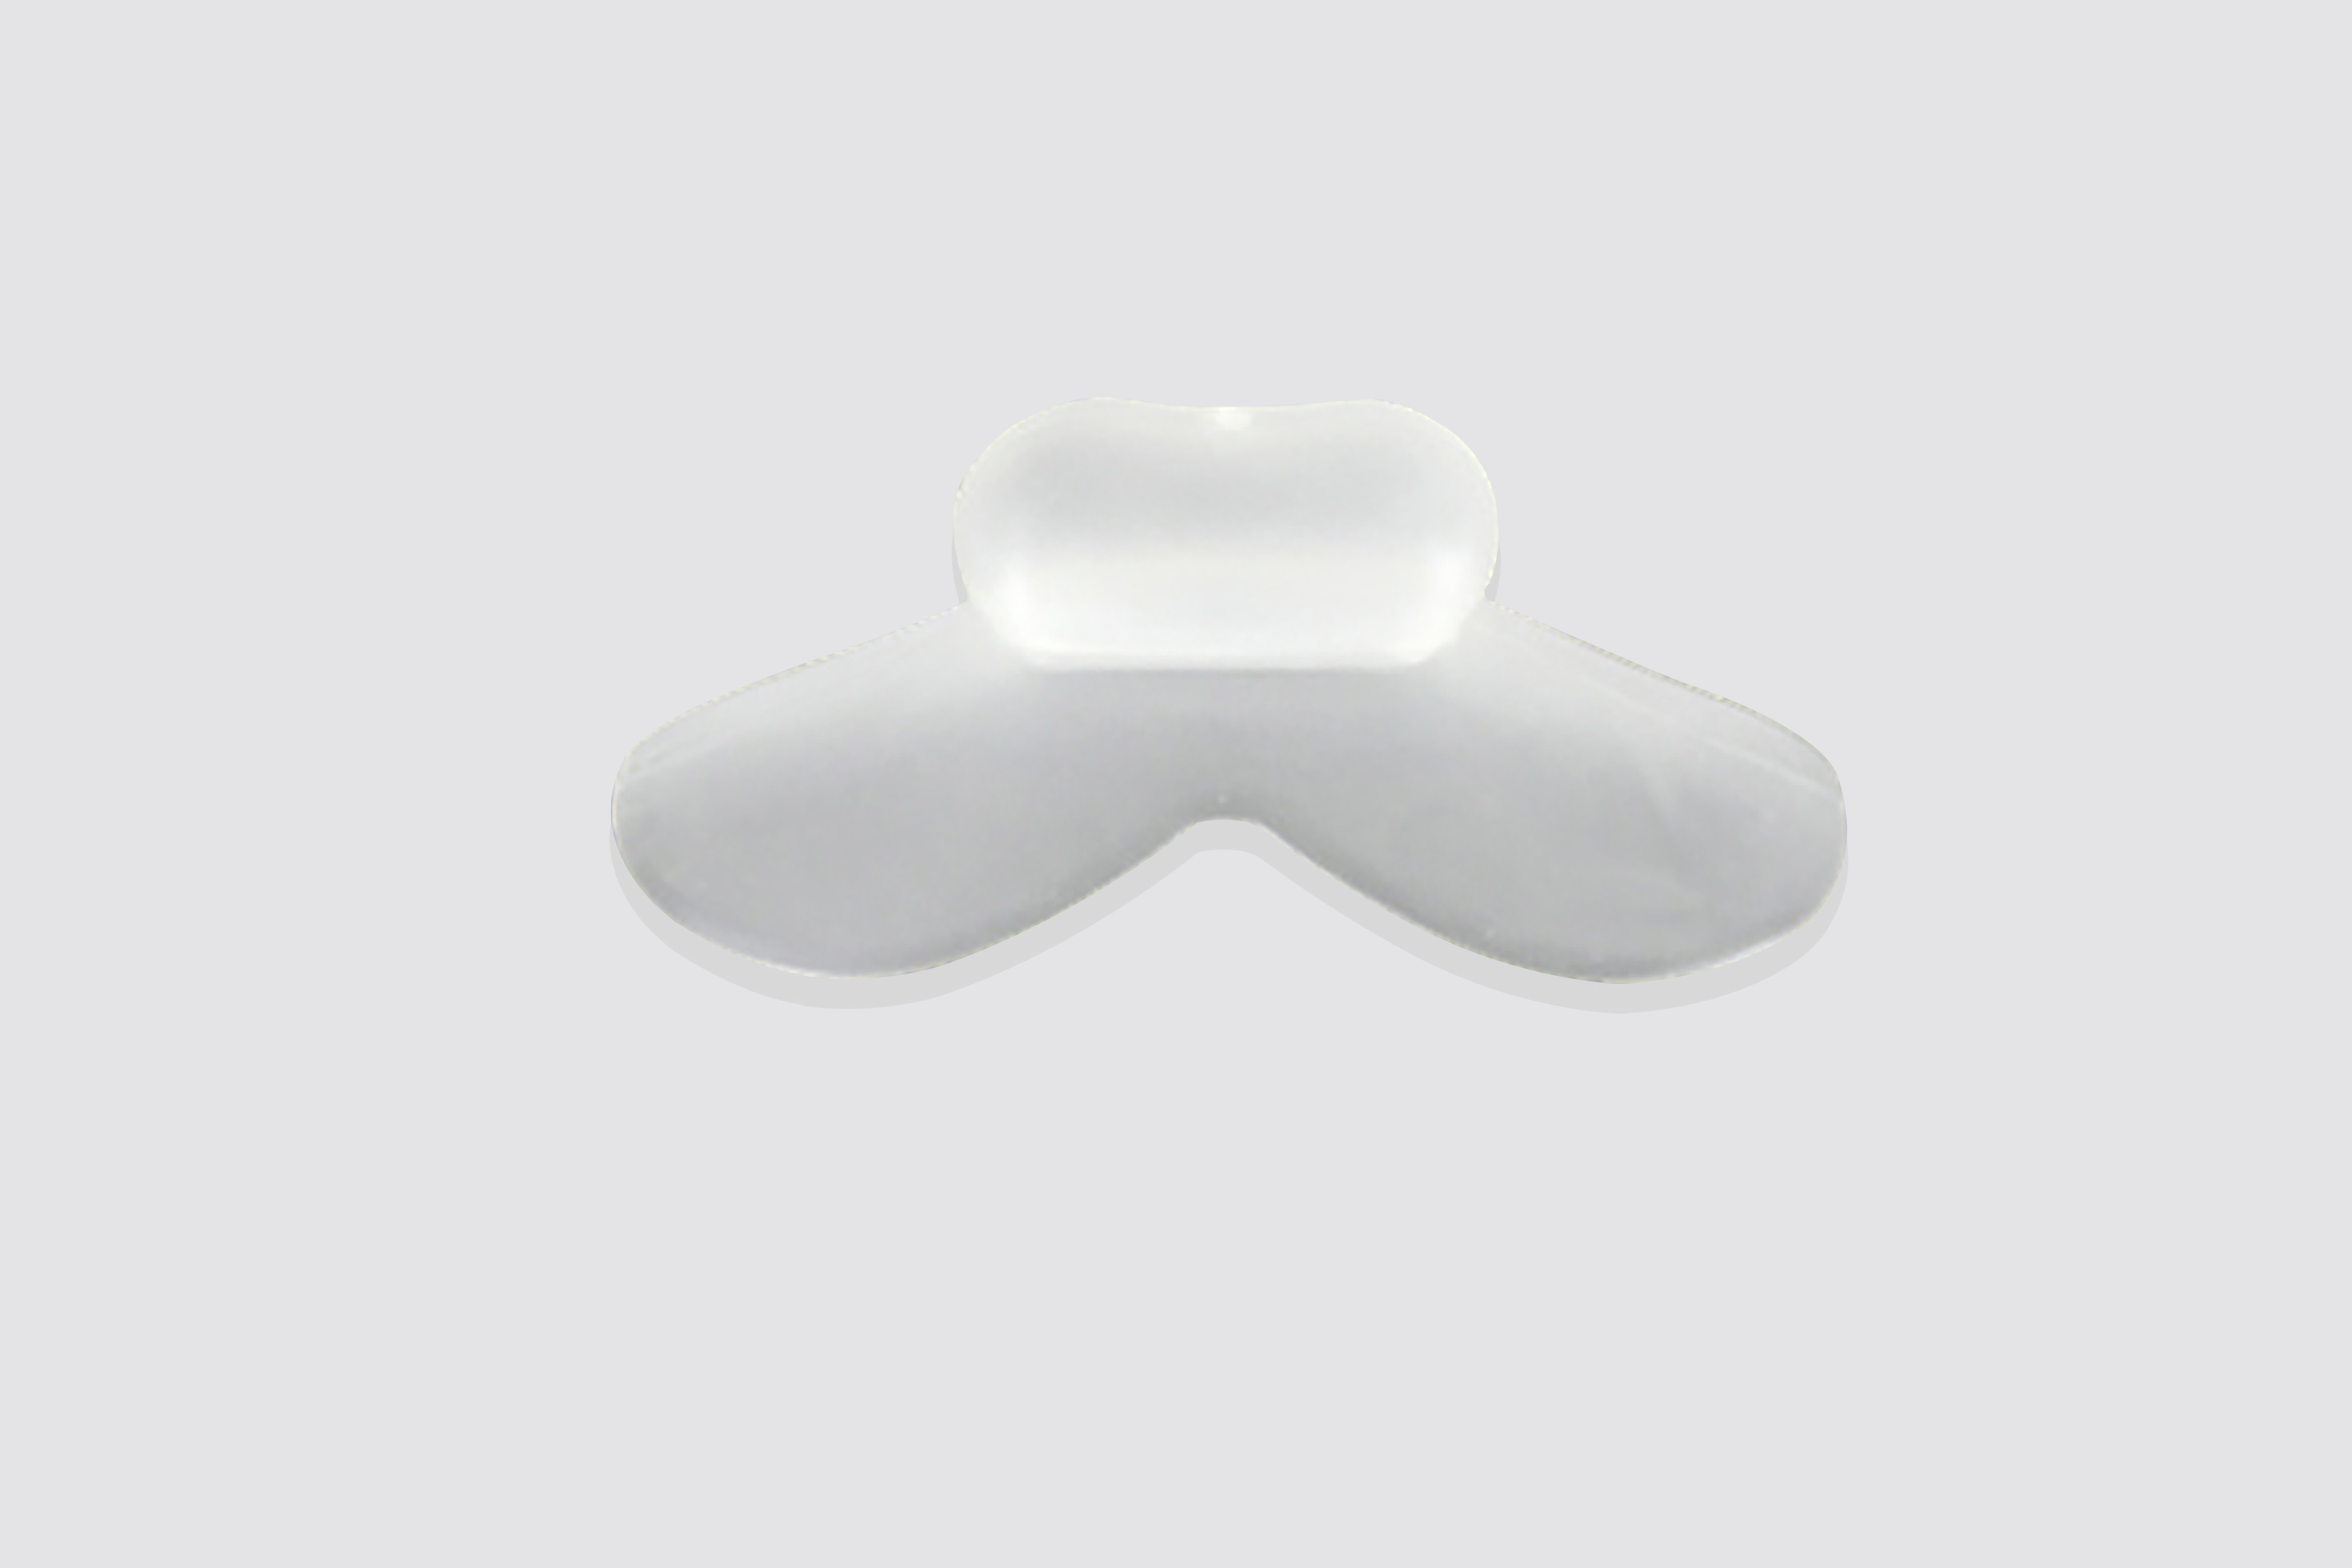 Soft Silicone Sleeping Aid Apnea Stop Snore Medical Silicone Tongue Sleeve Cover 